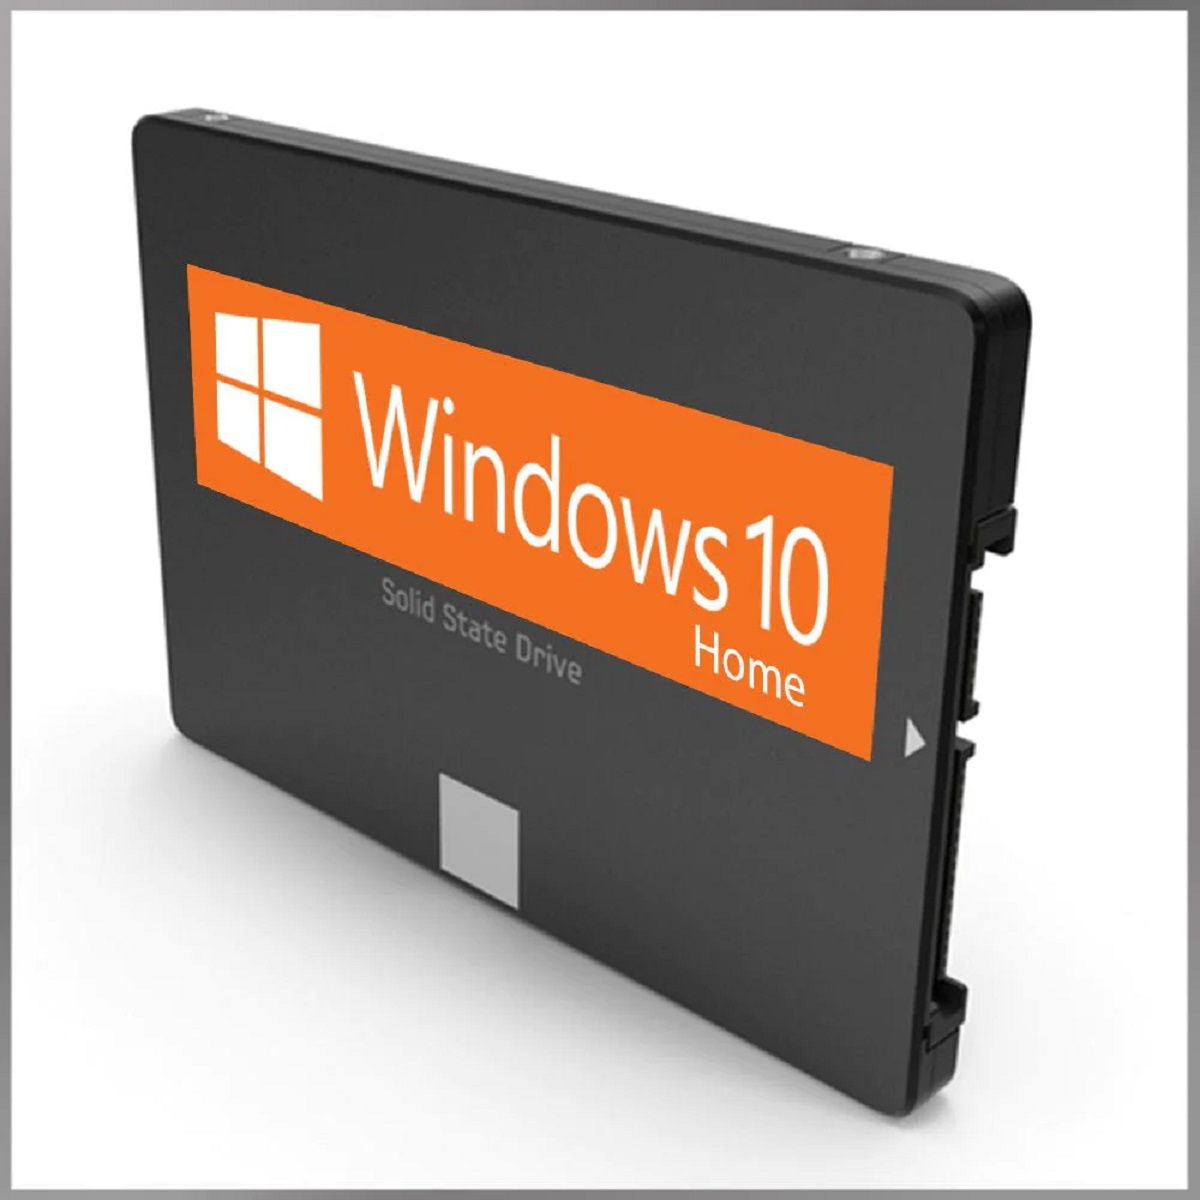 How To Transfer Win 10 To SSD